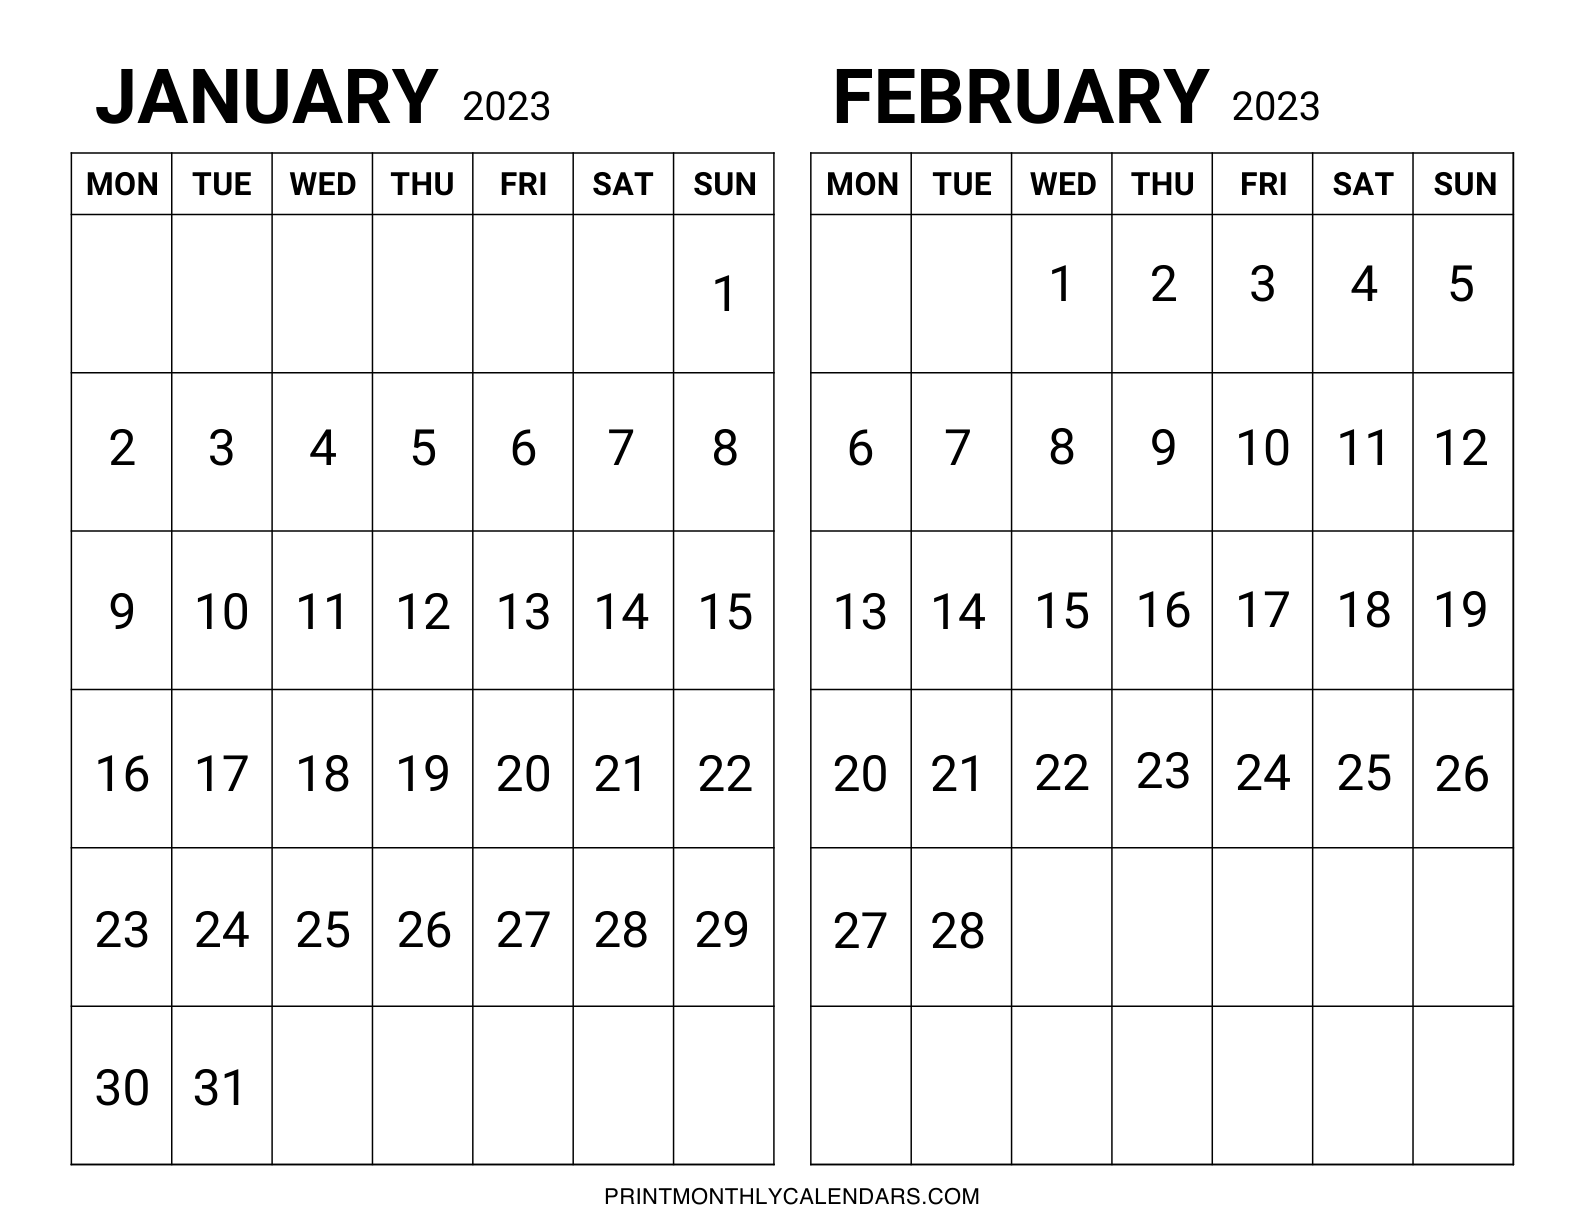 January February 2023 Calendar template with Weekdays starting from Monday instead of Sunday. 2 month grids are arranged on one page in horizontal layout.